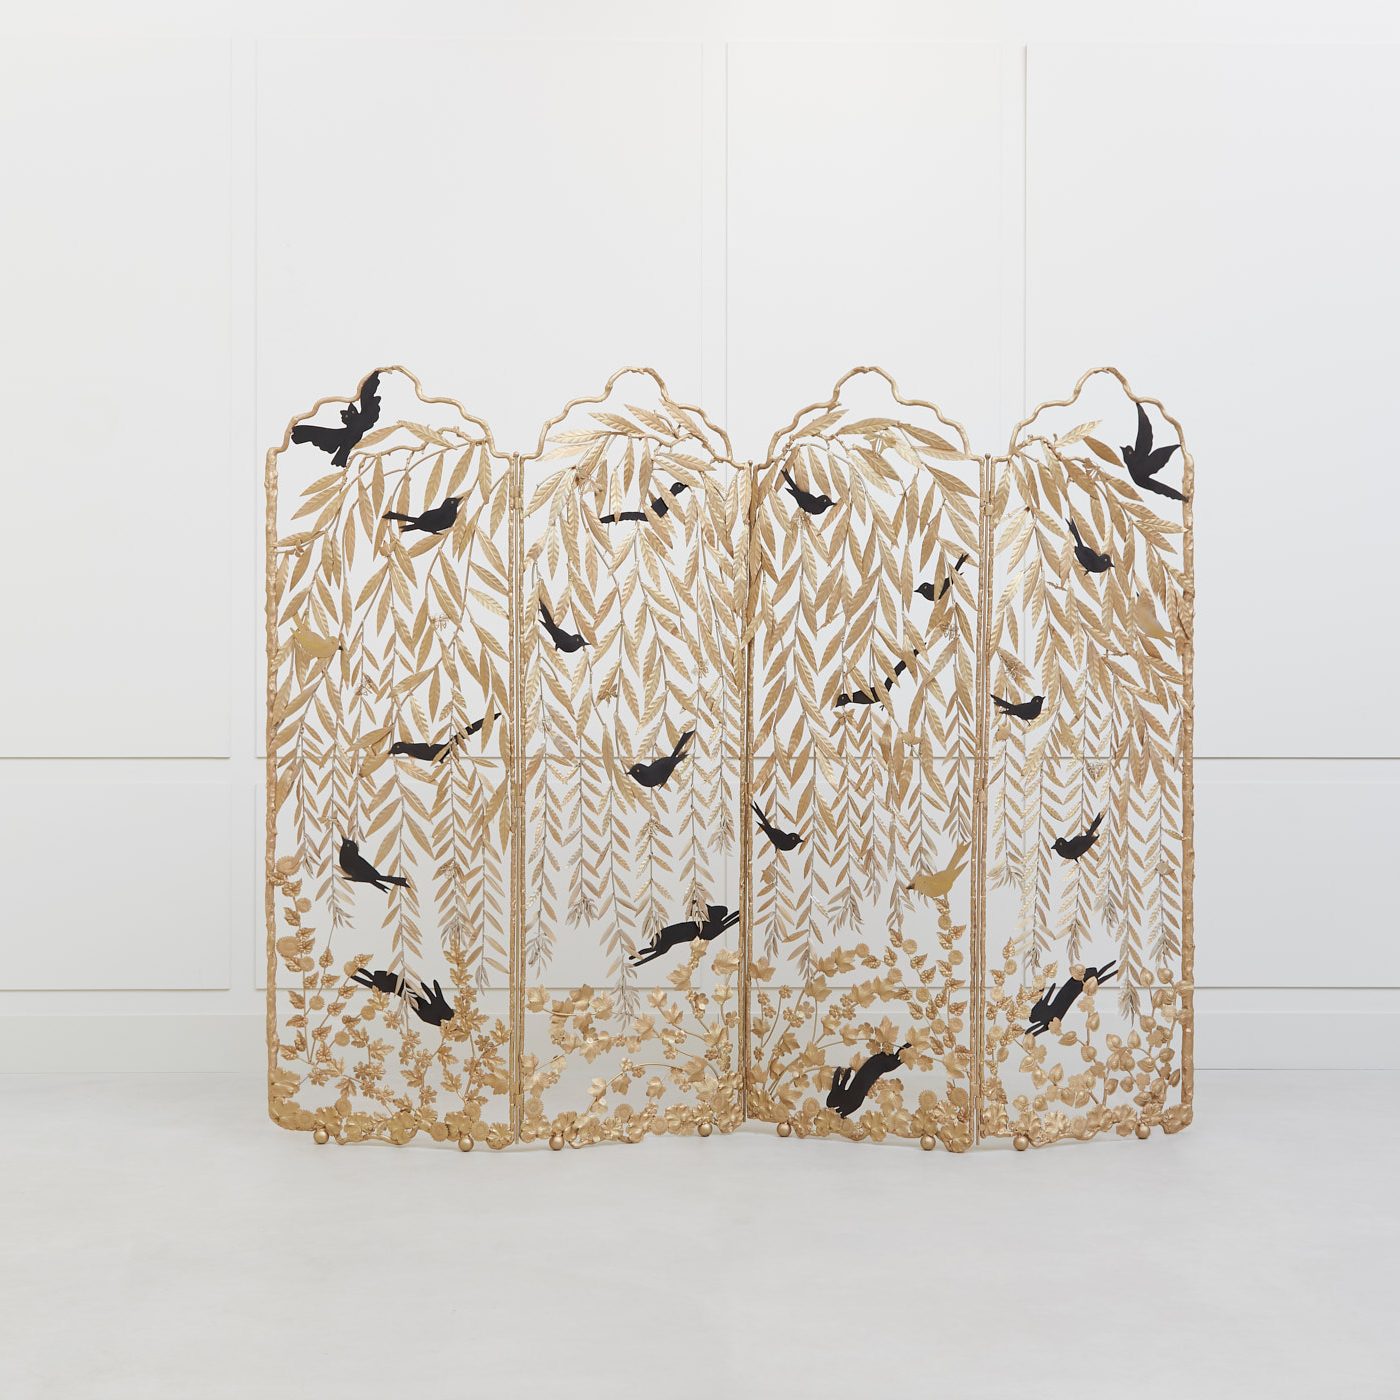 Joy de Rohan Chabot ,«The Weeping Willow , Black birds and Rabbits», vue 01